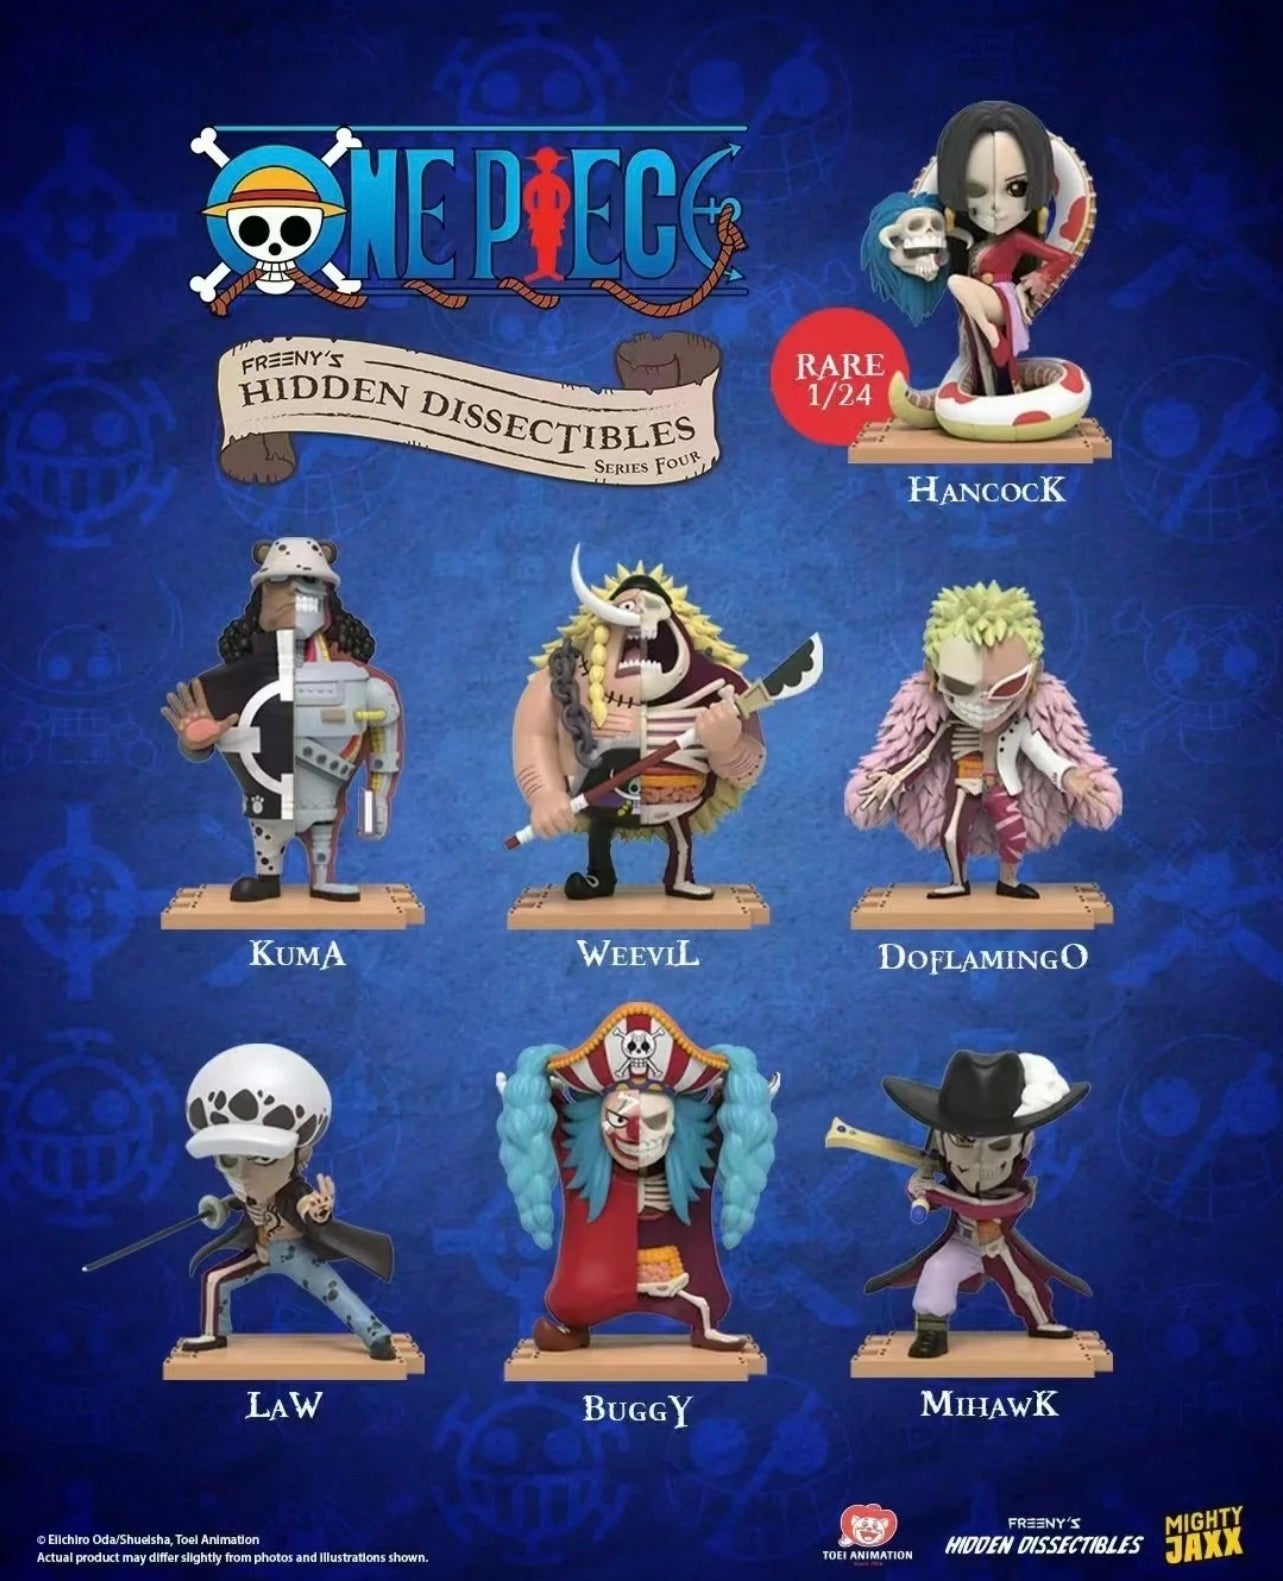 [Mighty Jaxx] ONE PIECE - Freeny's Hidden Dissectibles Series 4 Blind Box